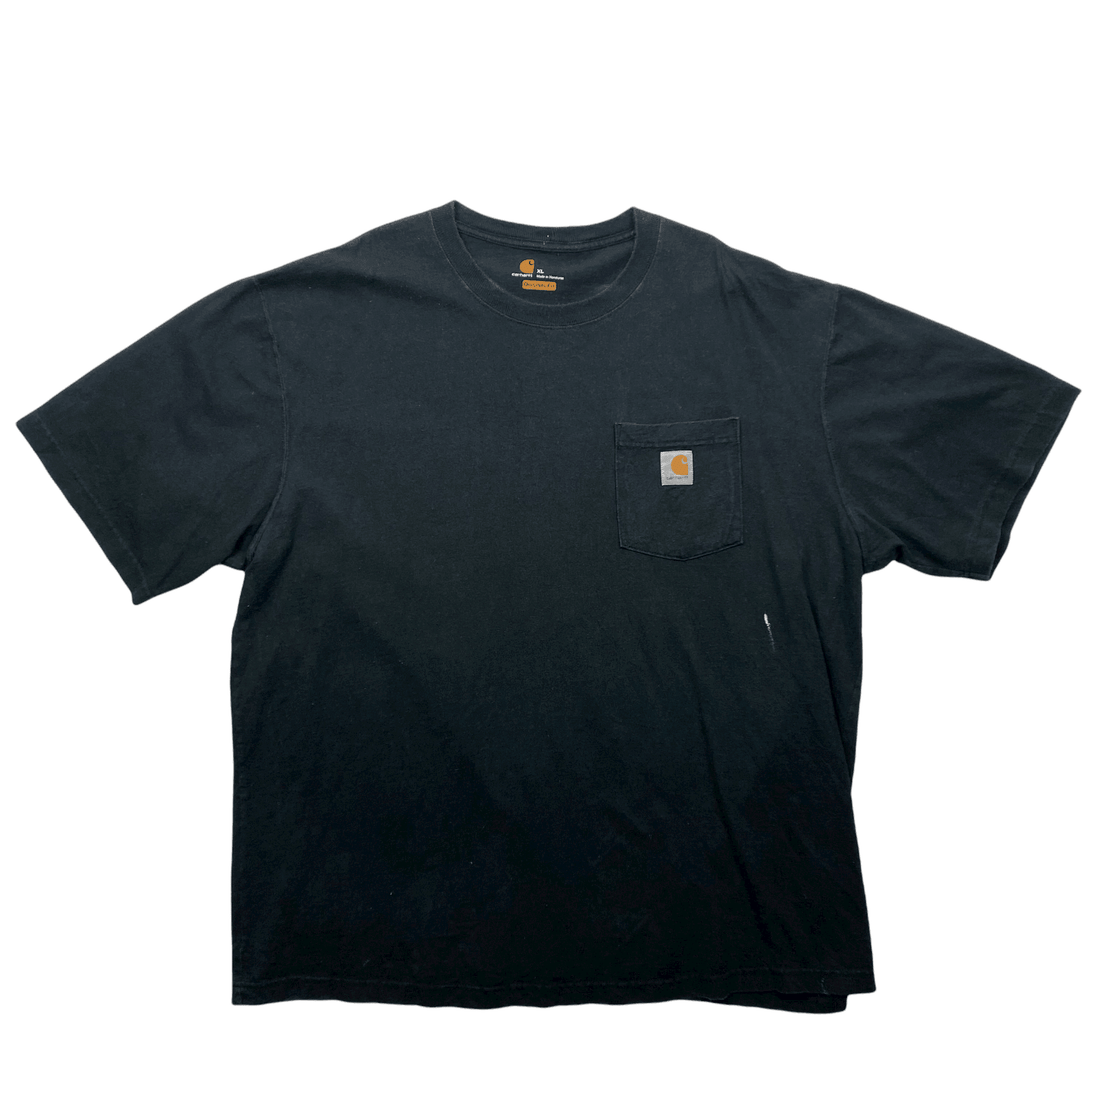 Vintage 90s Grey Carhartt Spell-Out Tee - Extra Large - The Streetwear Studio